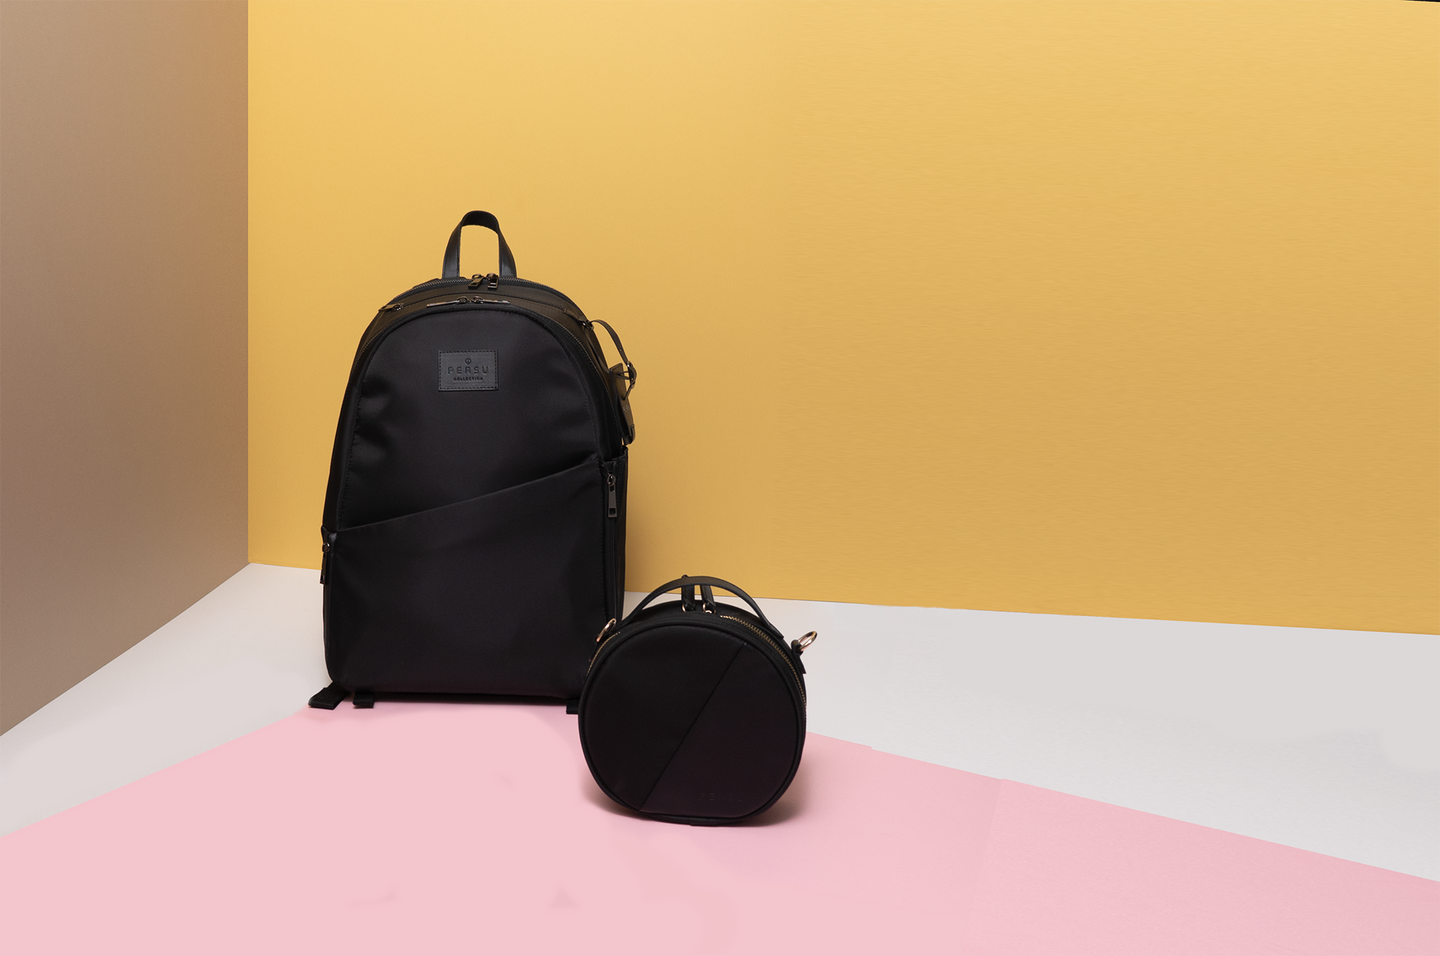 Introducing the Ama Backpack & Quila Bag